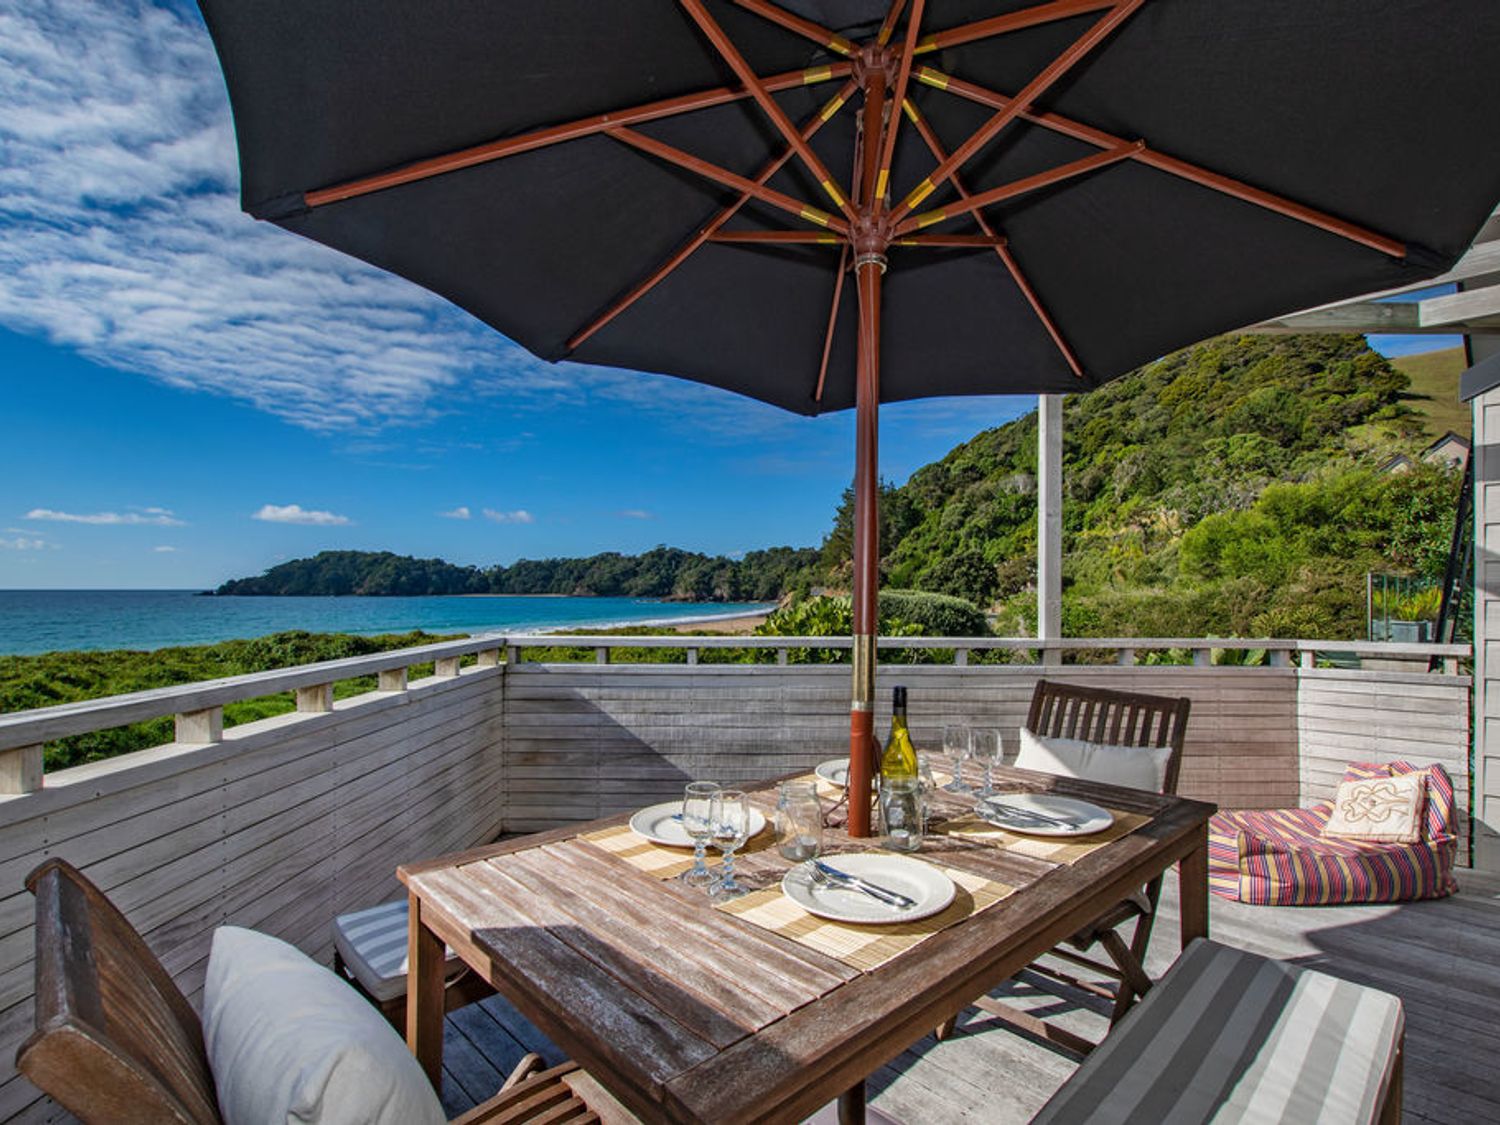 Spectacular Woolleys Bay - Matapouri Holiday Home -  - 1032775 - photo 1